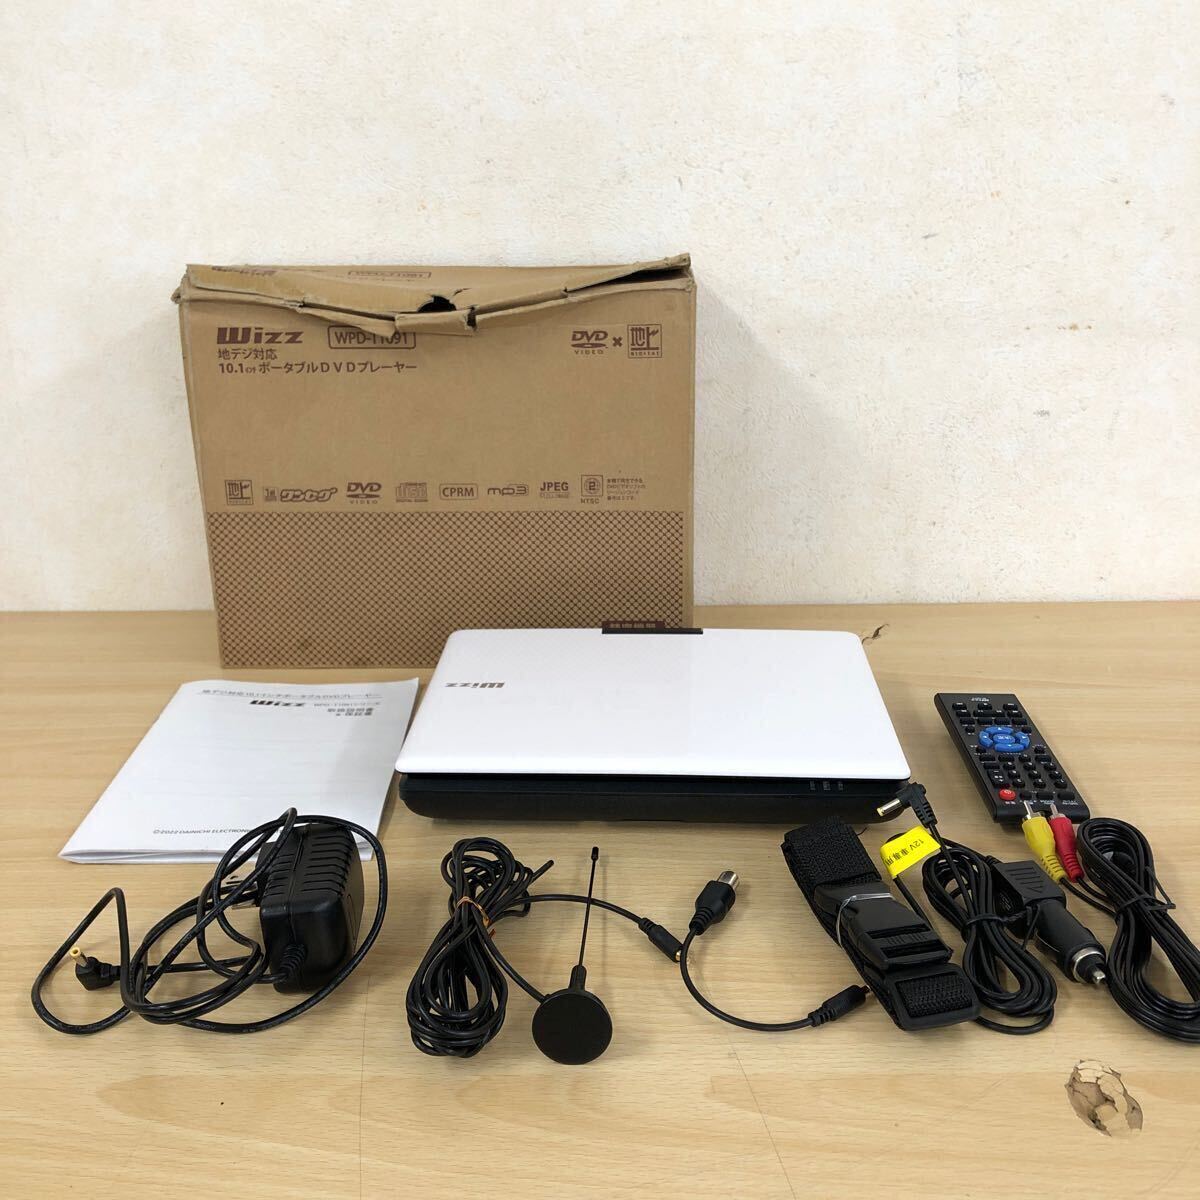  secondhand goods Wizz digital broadcasting correspondence 10.1 -inch portable DVD player WPD-T1091 body *DVD player * consumer electronics 